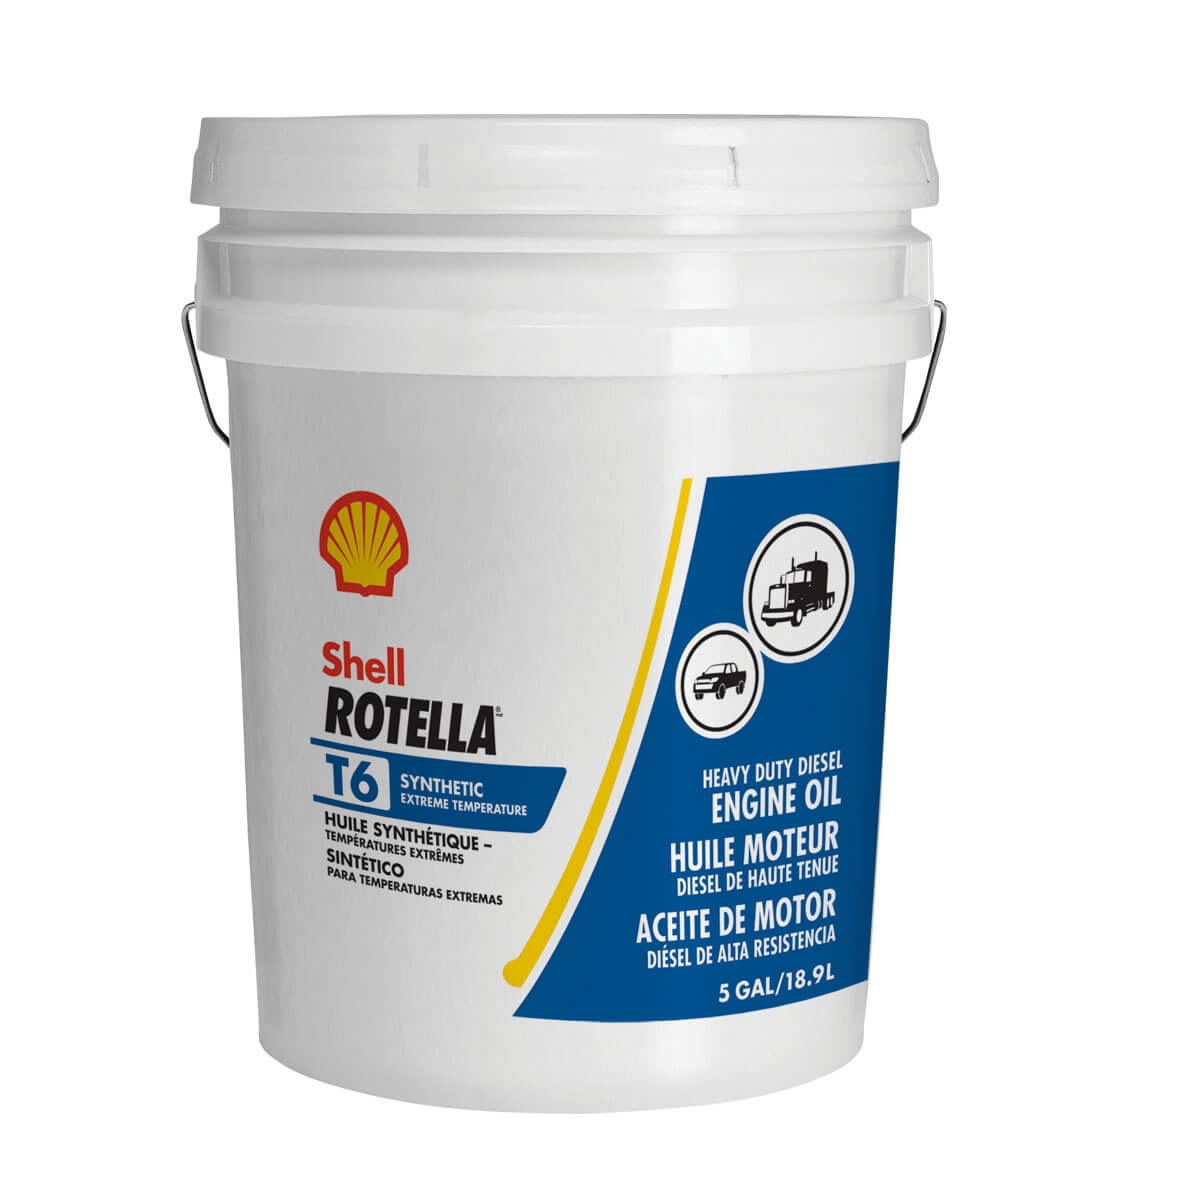 Shell Rotella T6 Triple Protection Synthetic 0W-40 - 18.9 L